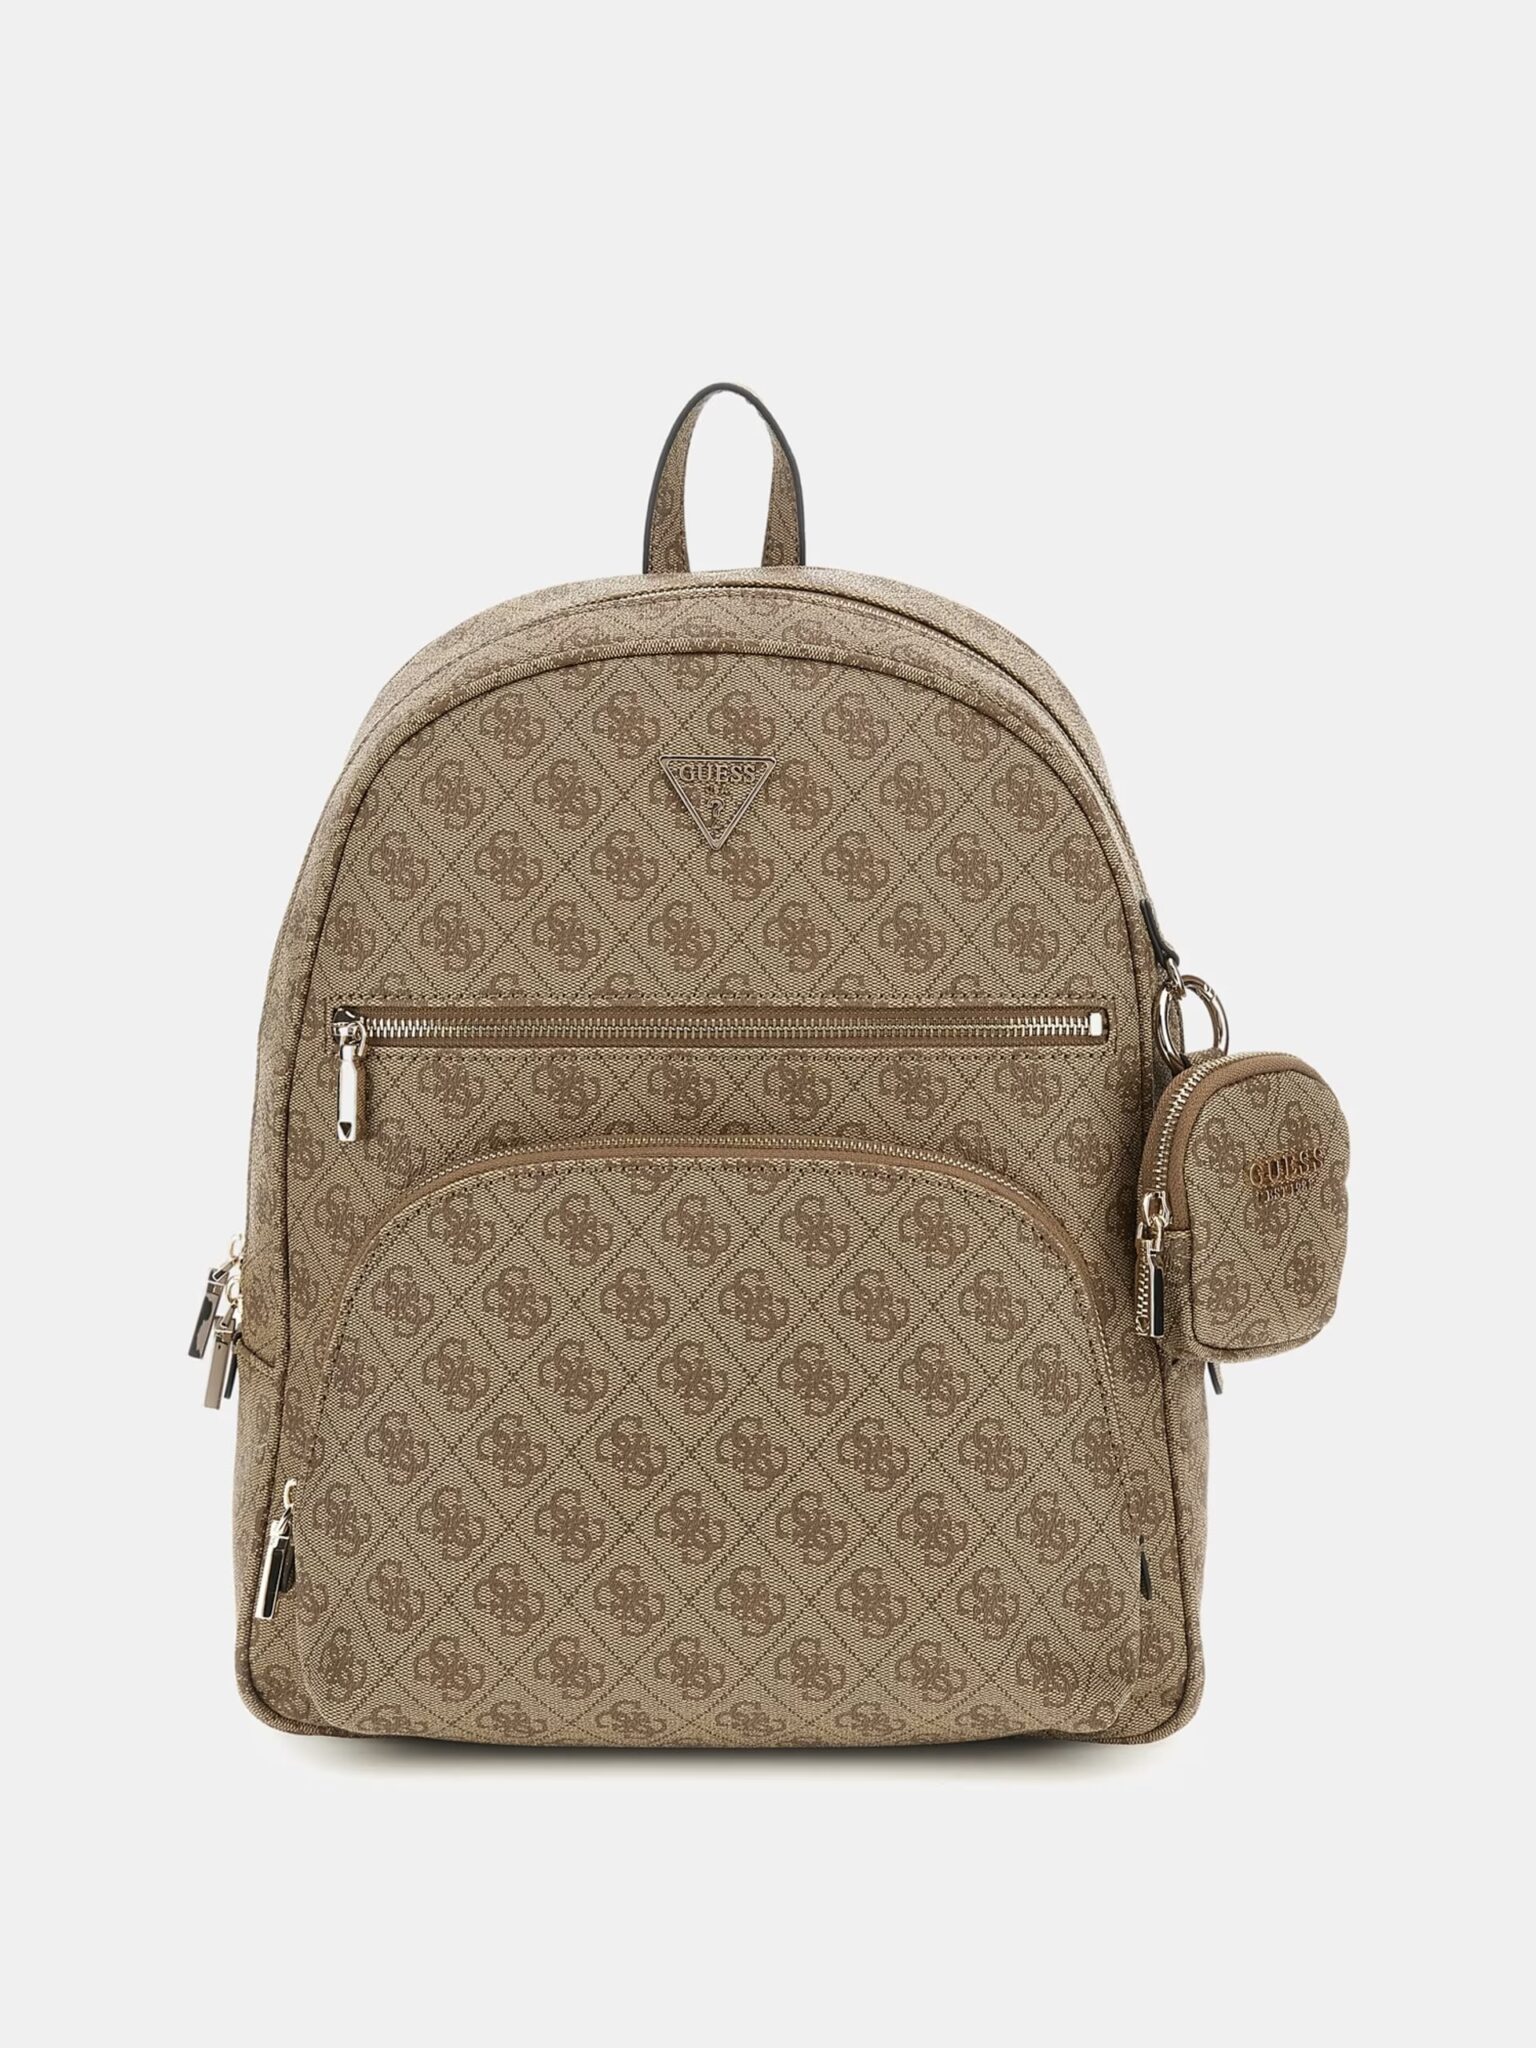 GUESS POWER PLAY LARGE TECH BACKPACK ΤΣΑΝΤΑ ΓΥΝΑΙΚΕΙΟ | BEIGE